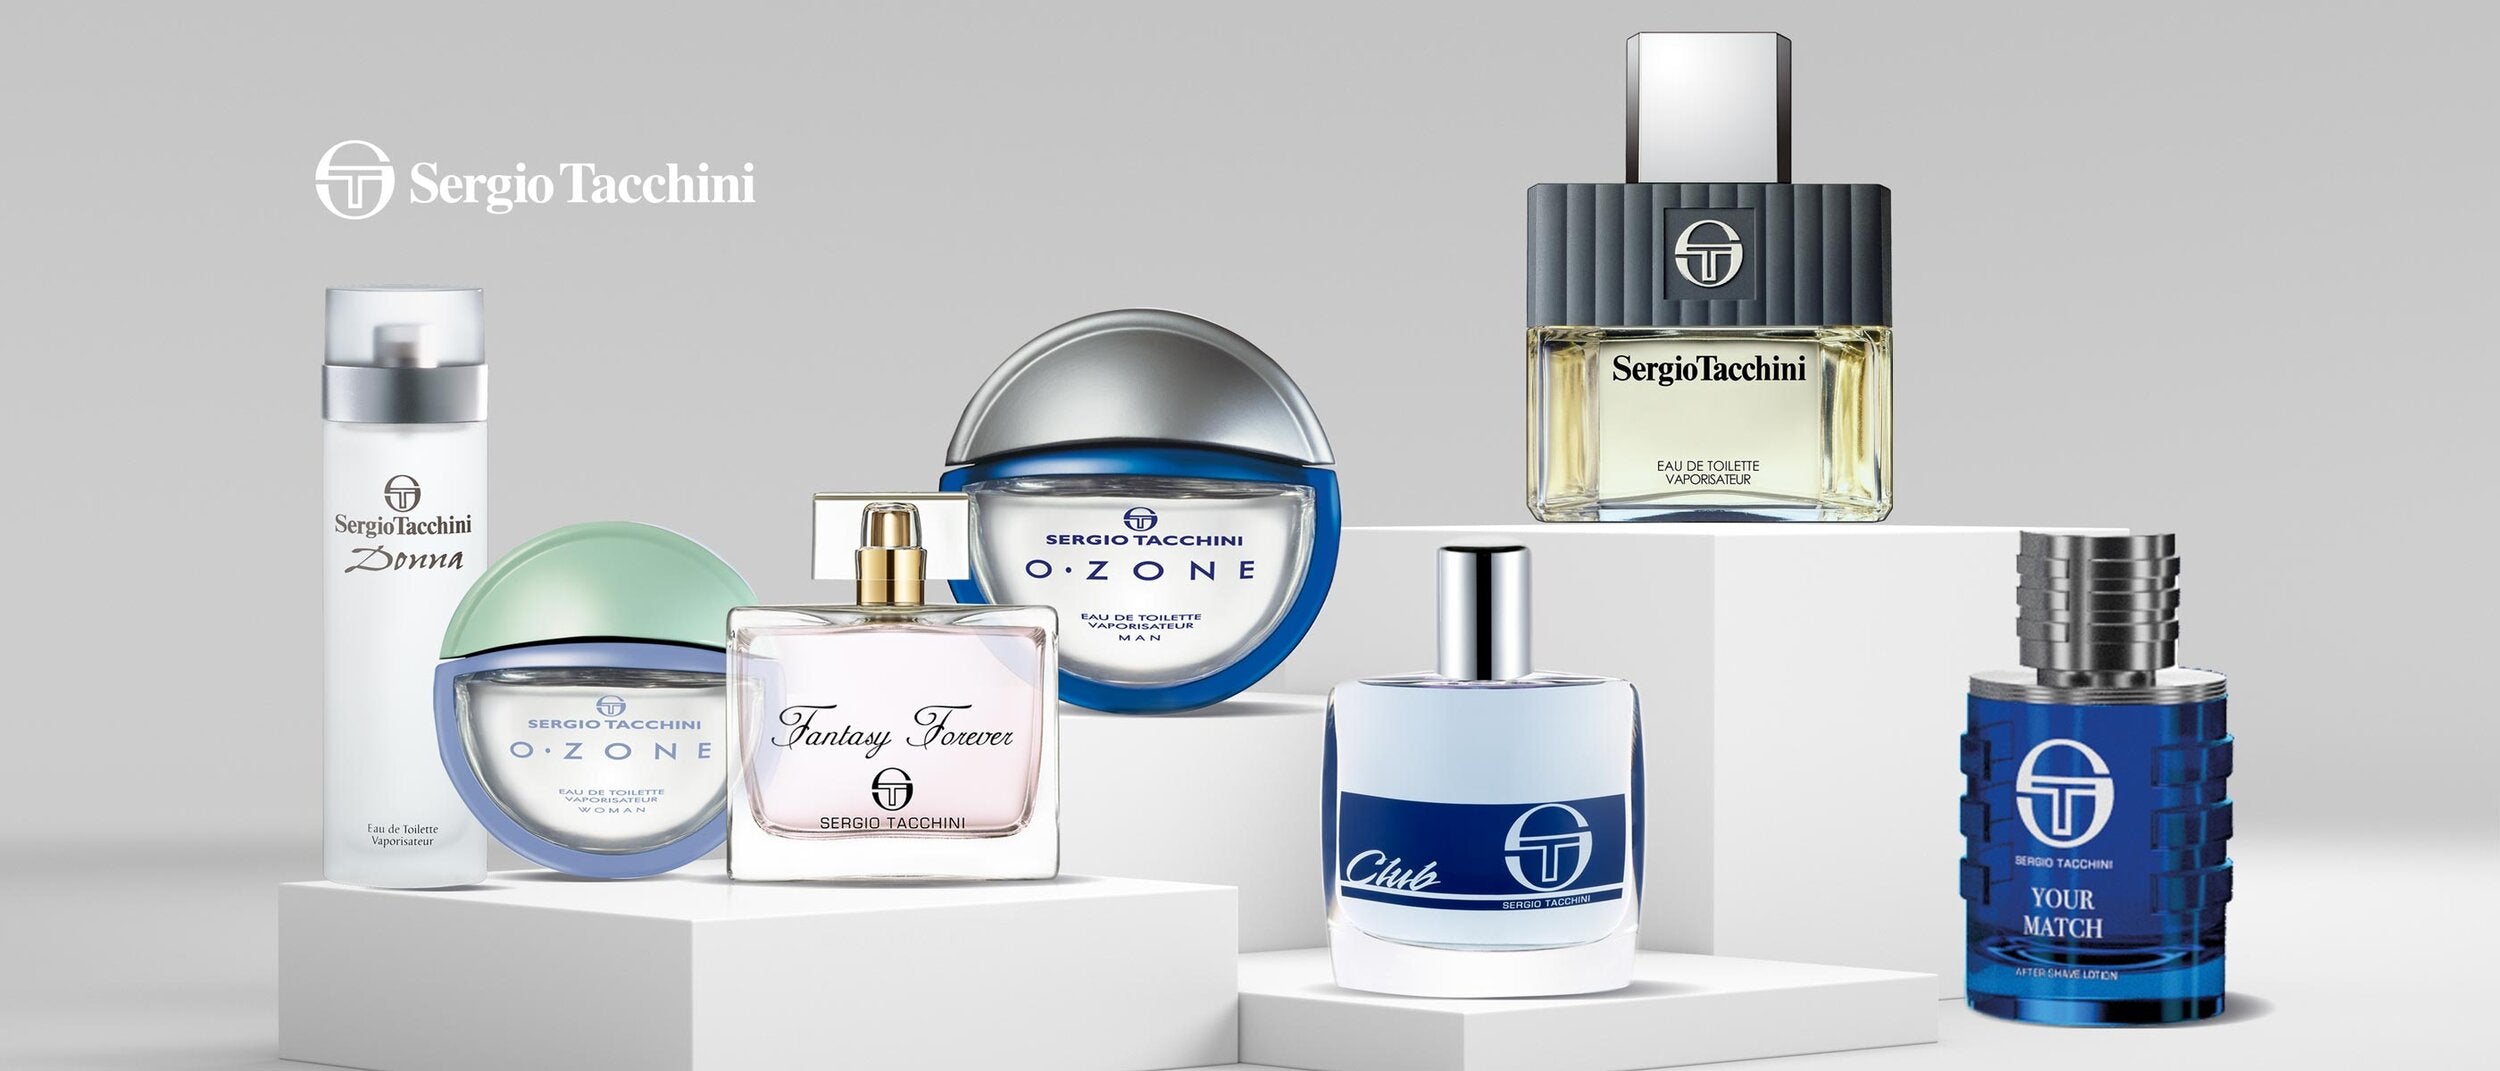 Complete collection of SERGIO TACCHINI is available at THE PERFUME WORLD.